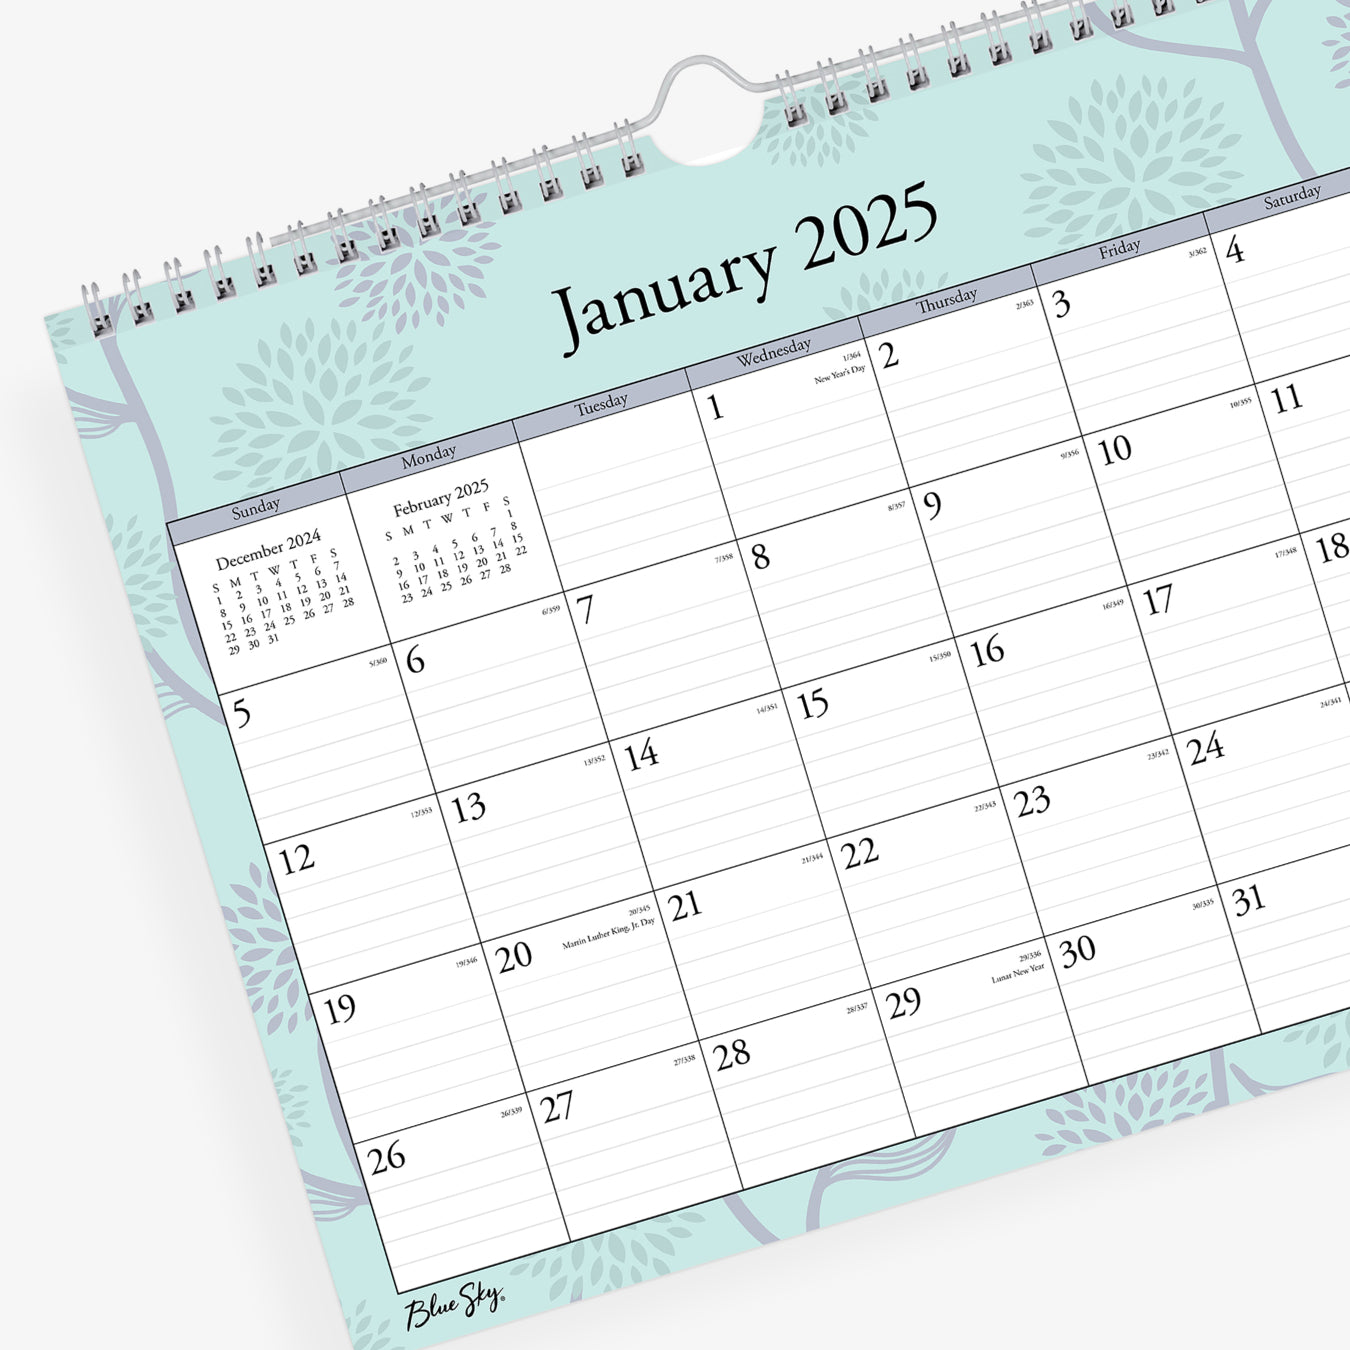 January 2025 - December 2025 monthly wall calendar in 11 x 8.75 size